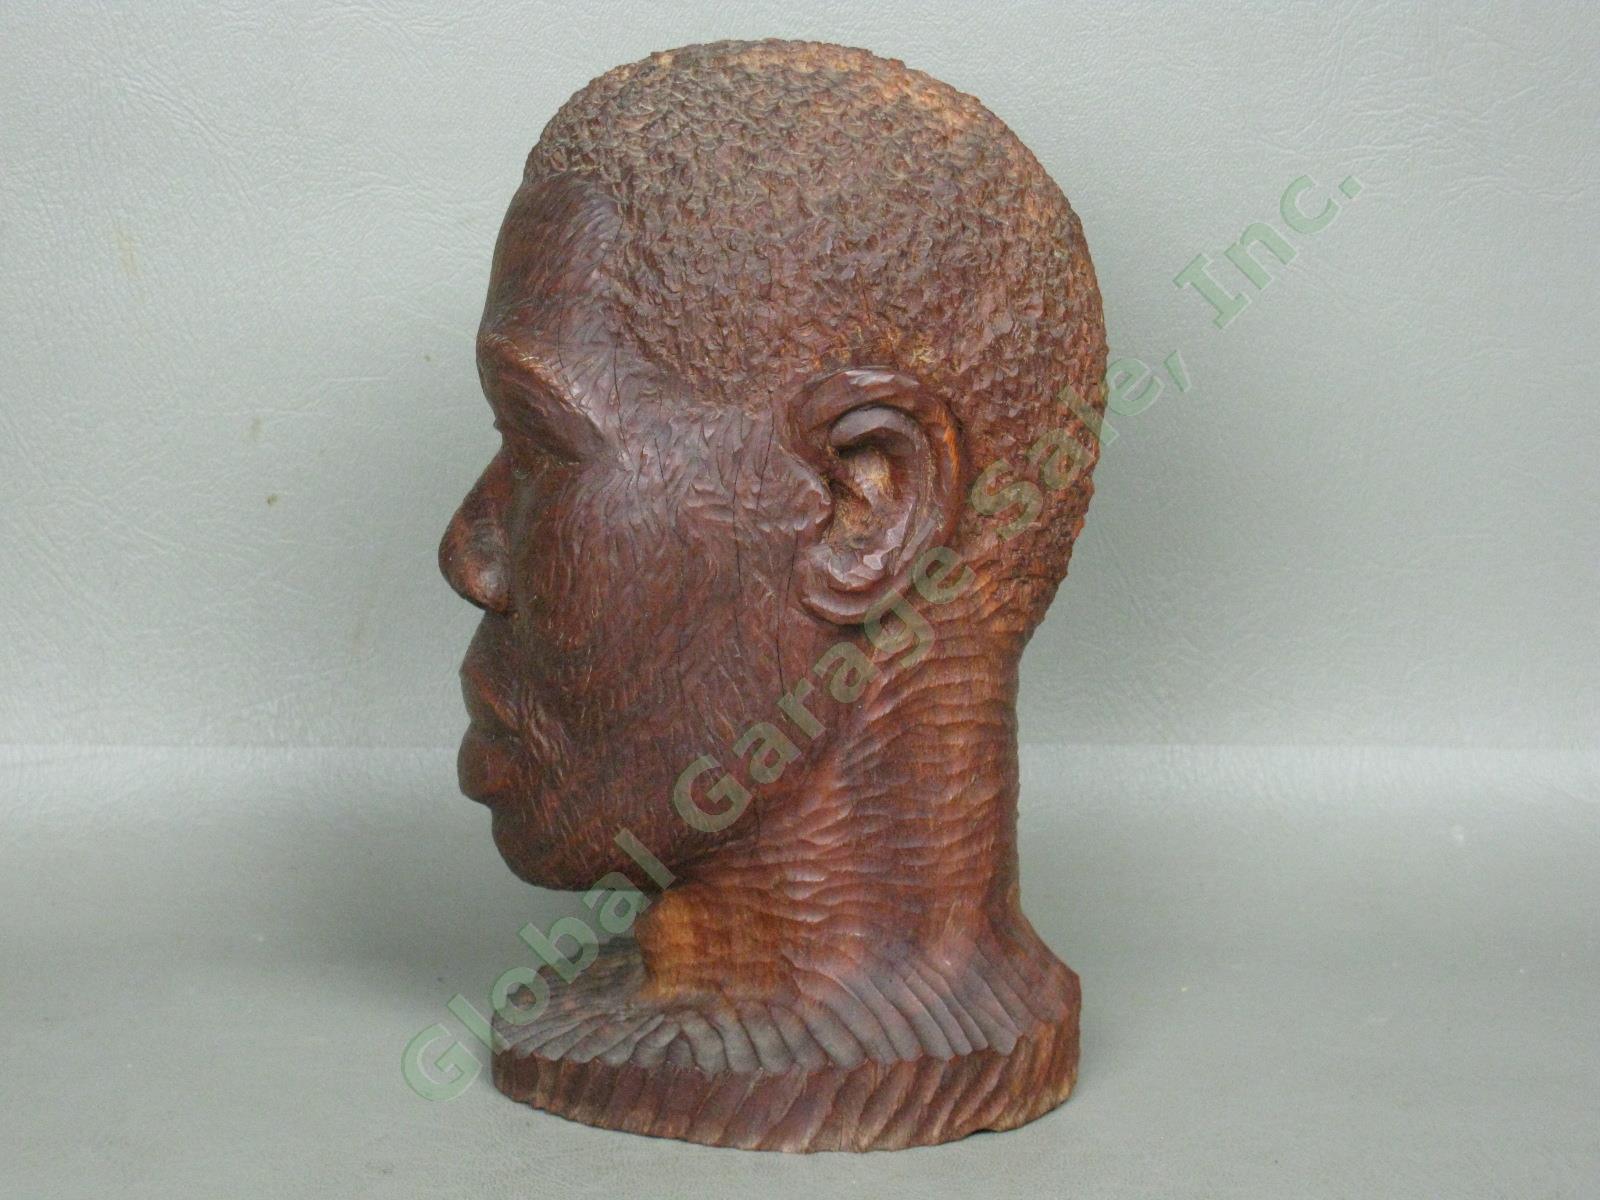 Vtg 1940s Jamaican Jamaica BWI 7" Male Head Bust Wood Carving Signed Lazarus NR! 5